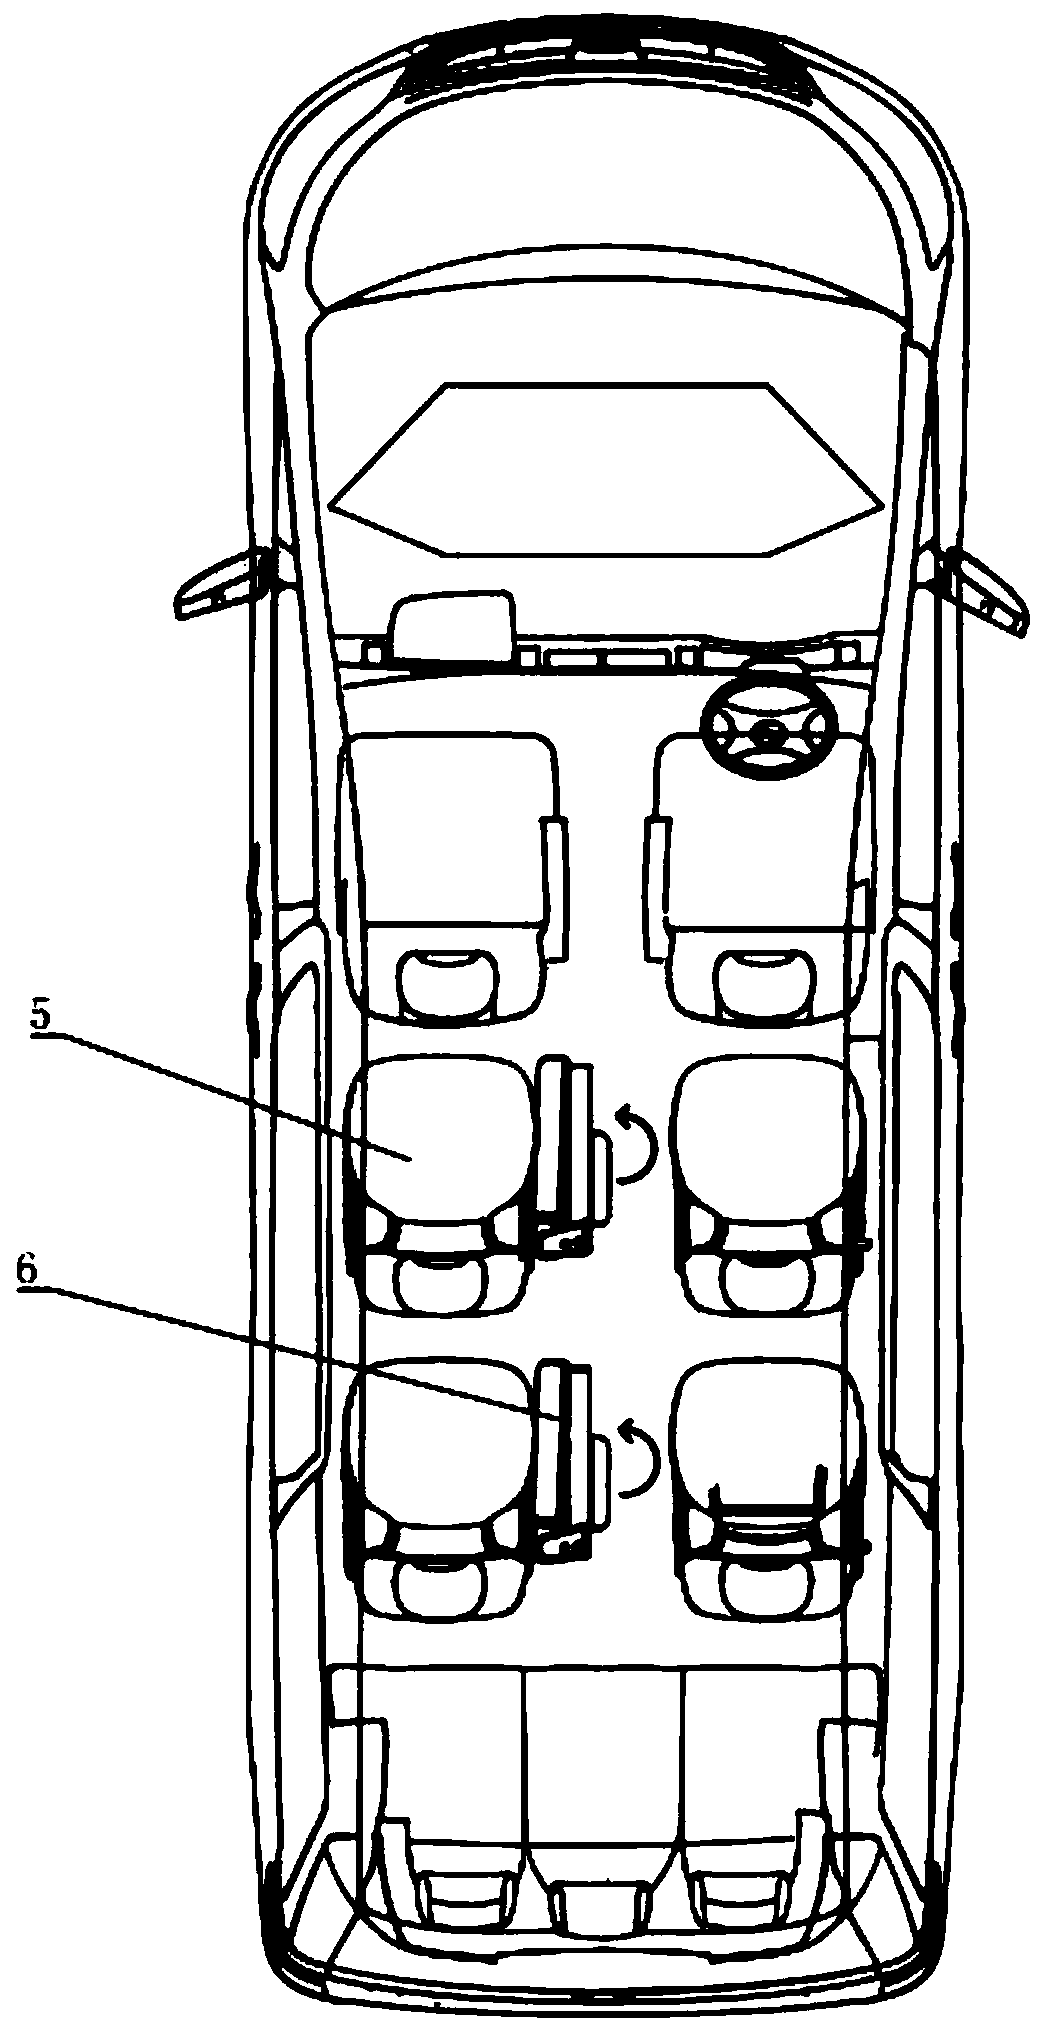 11-seat seat system for passenger car